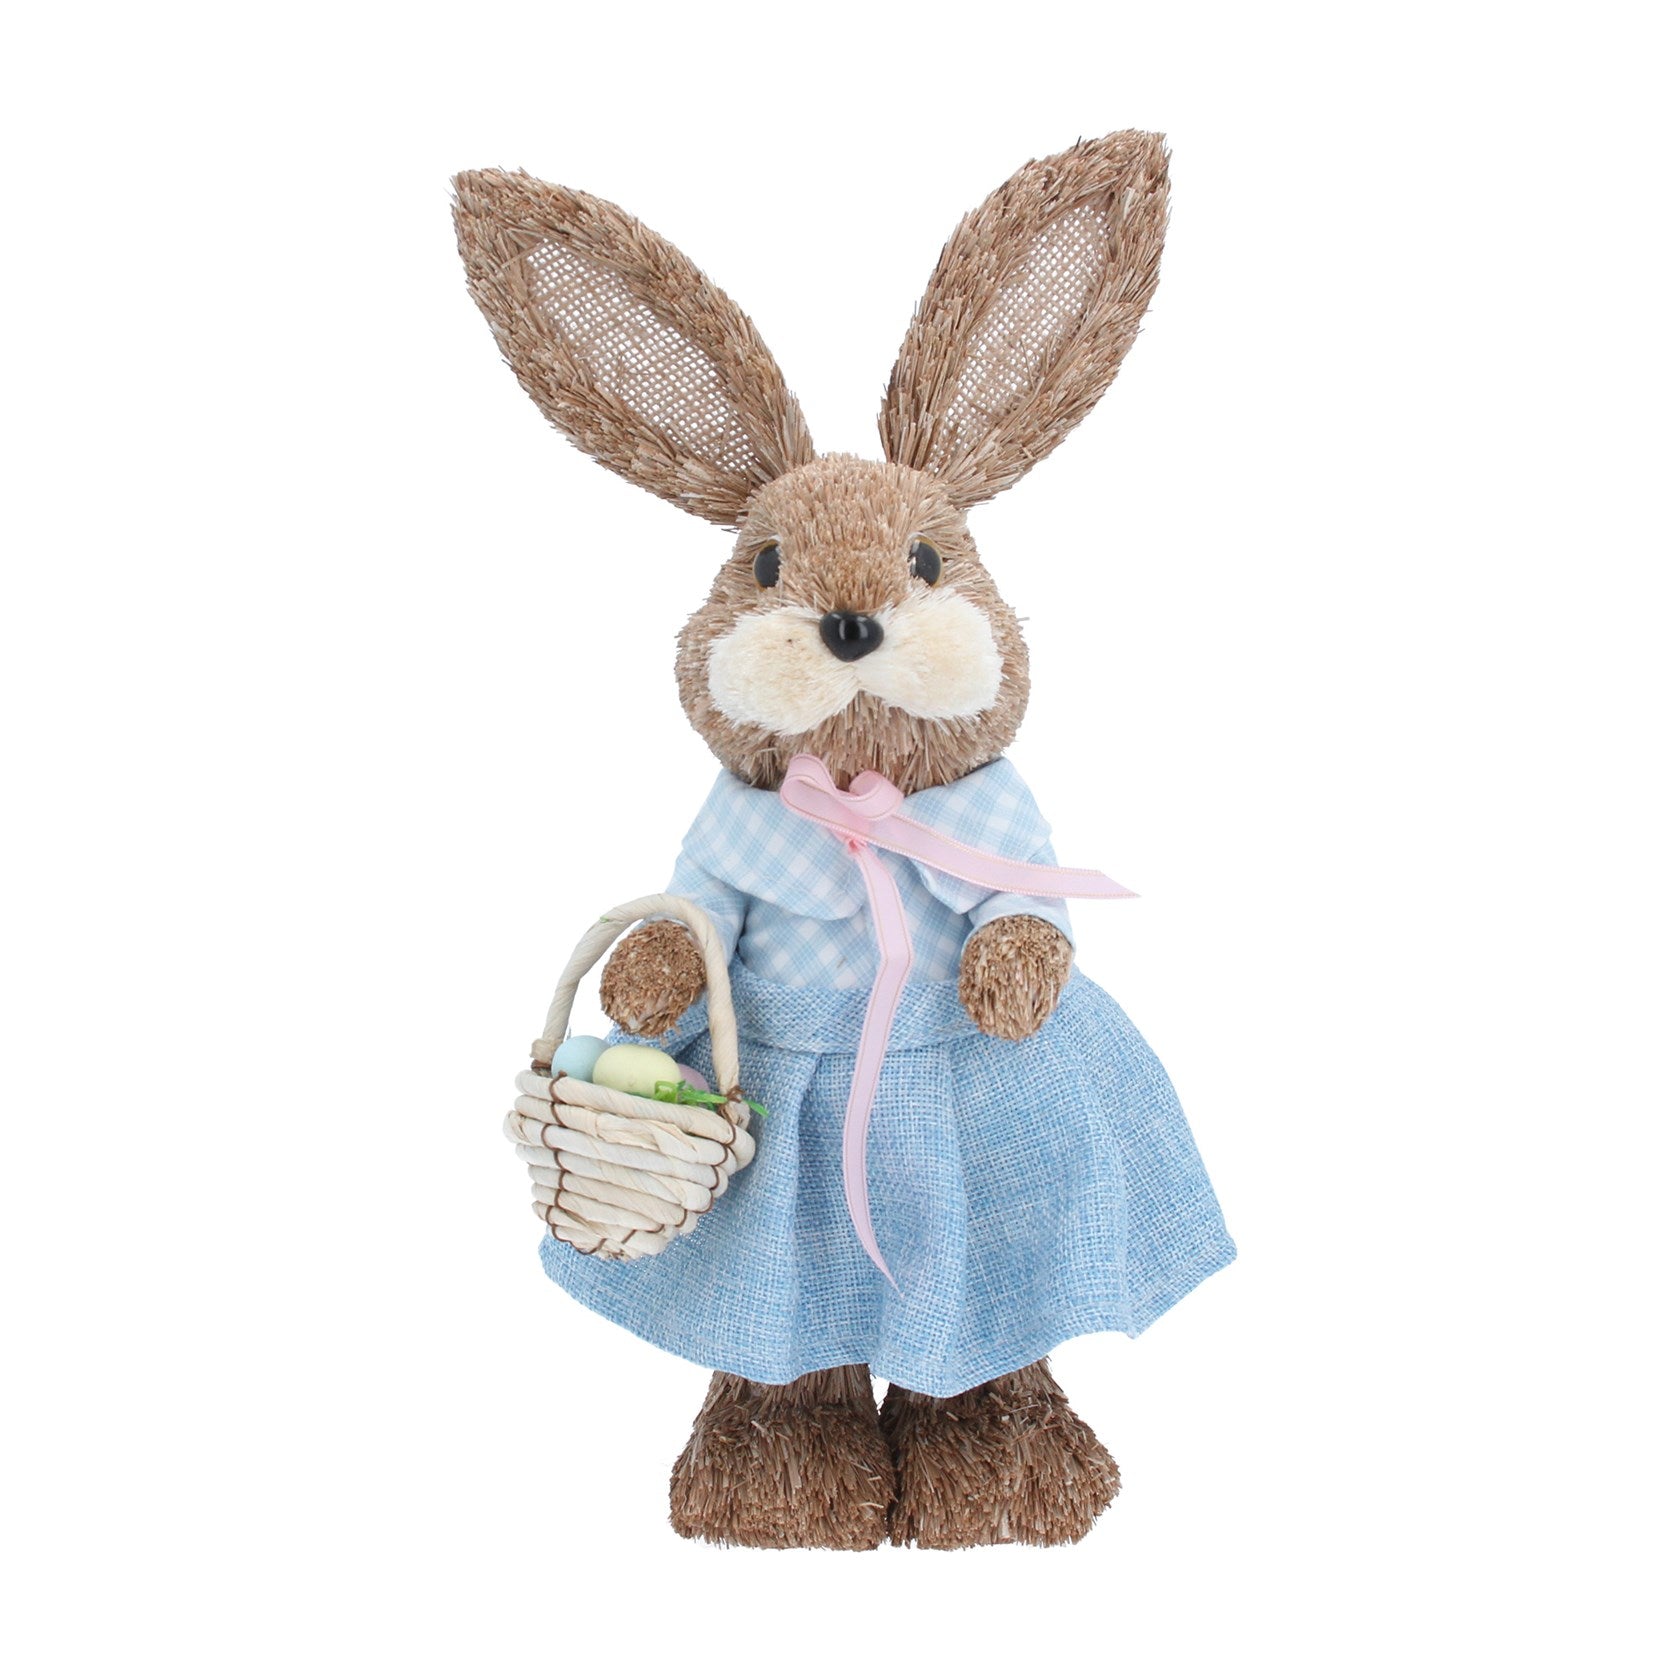 Bristle Bunny with Gingham Dress & Basket